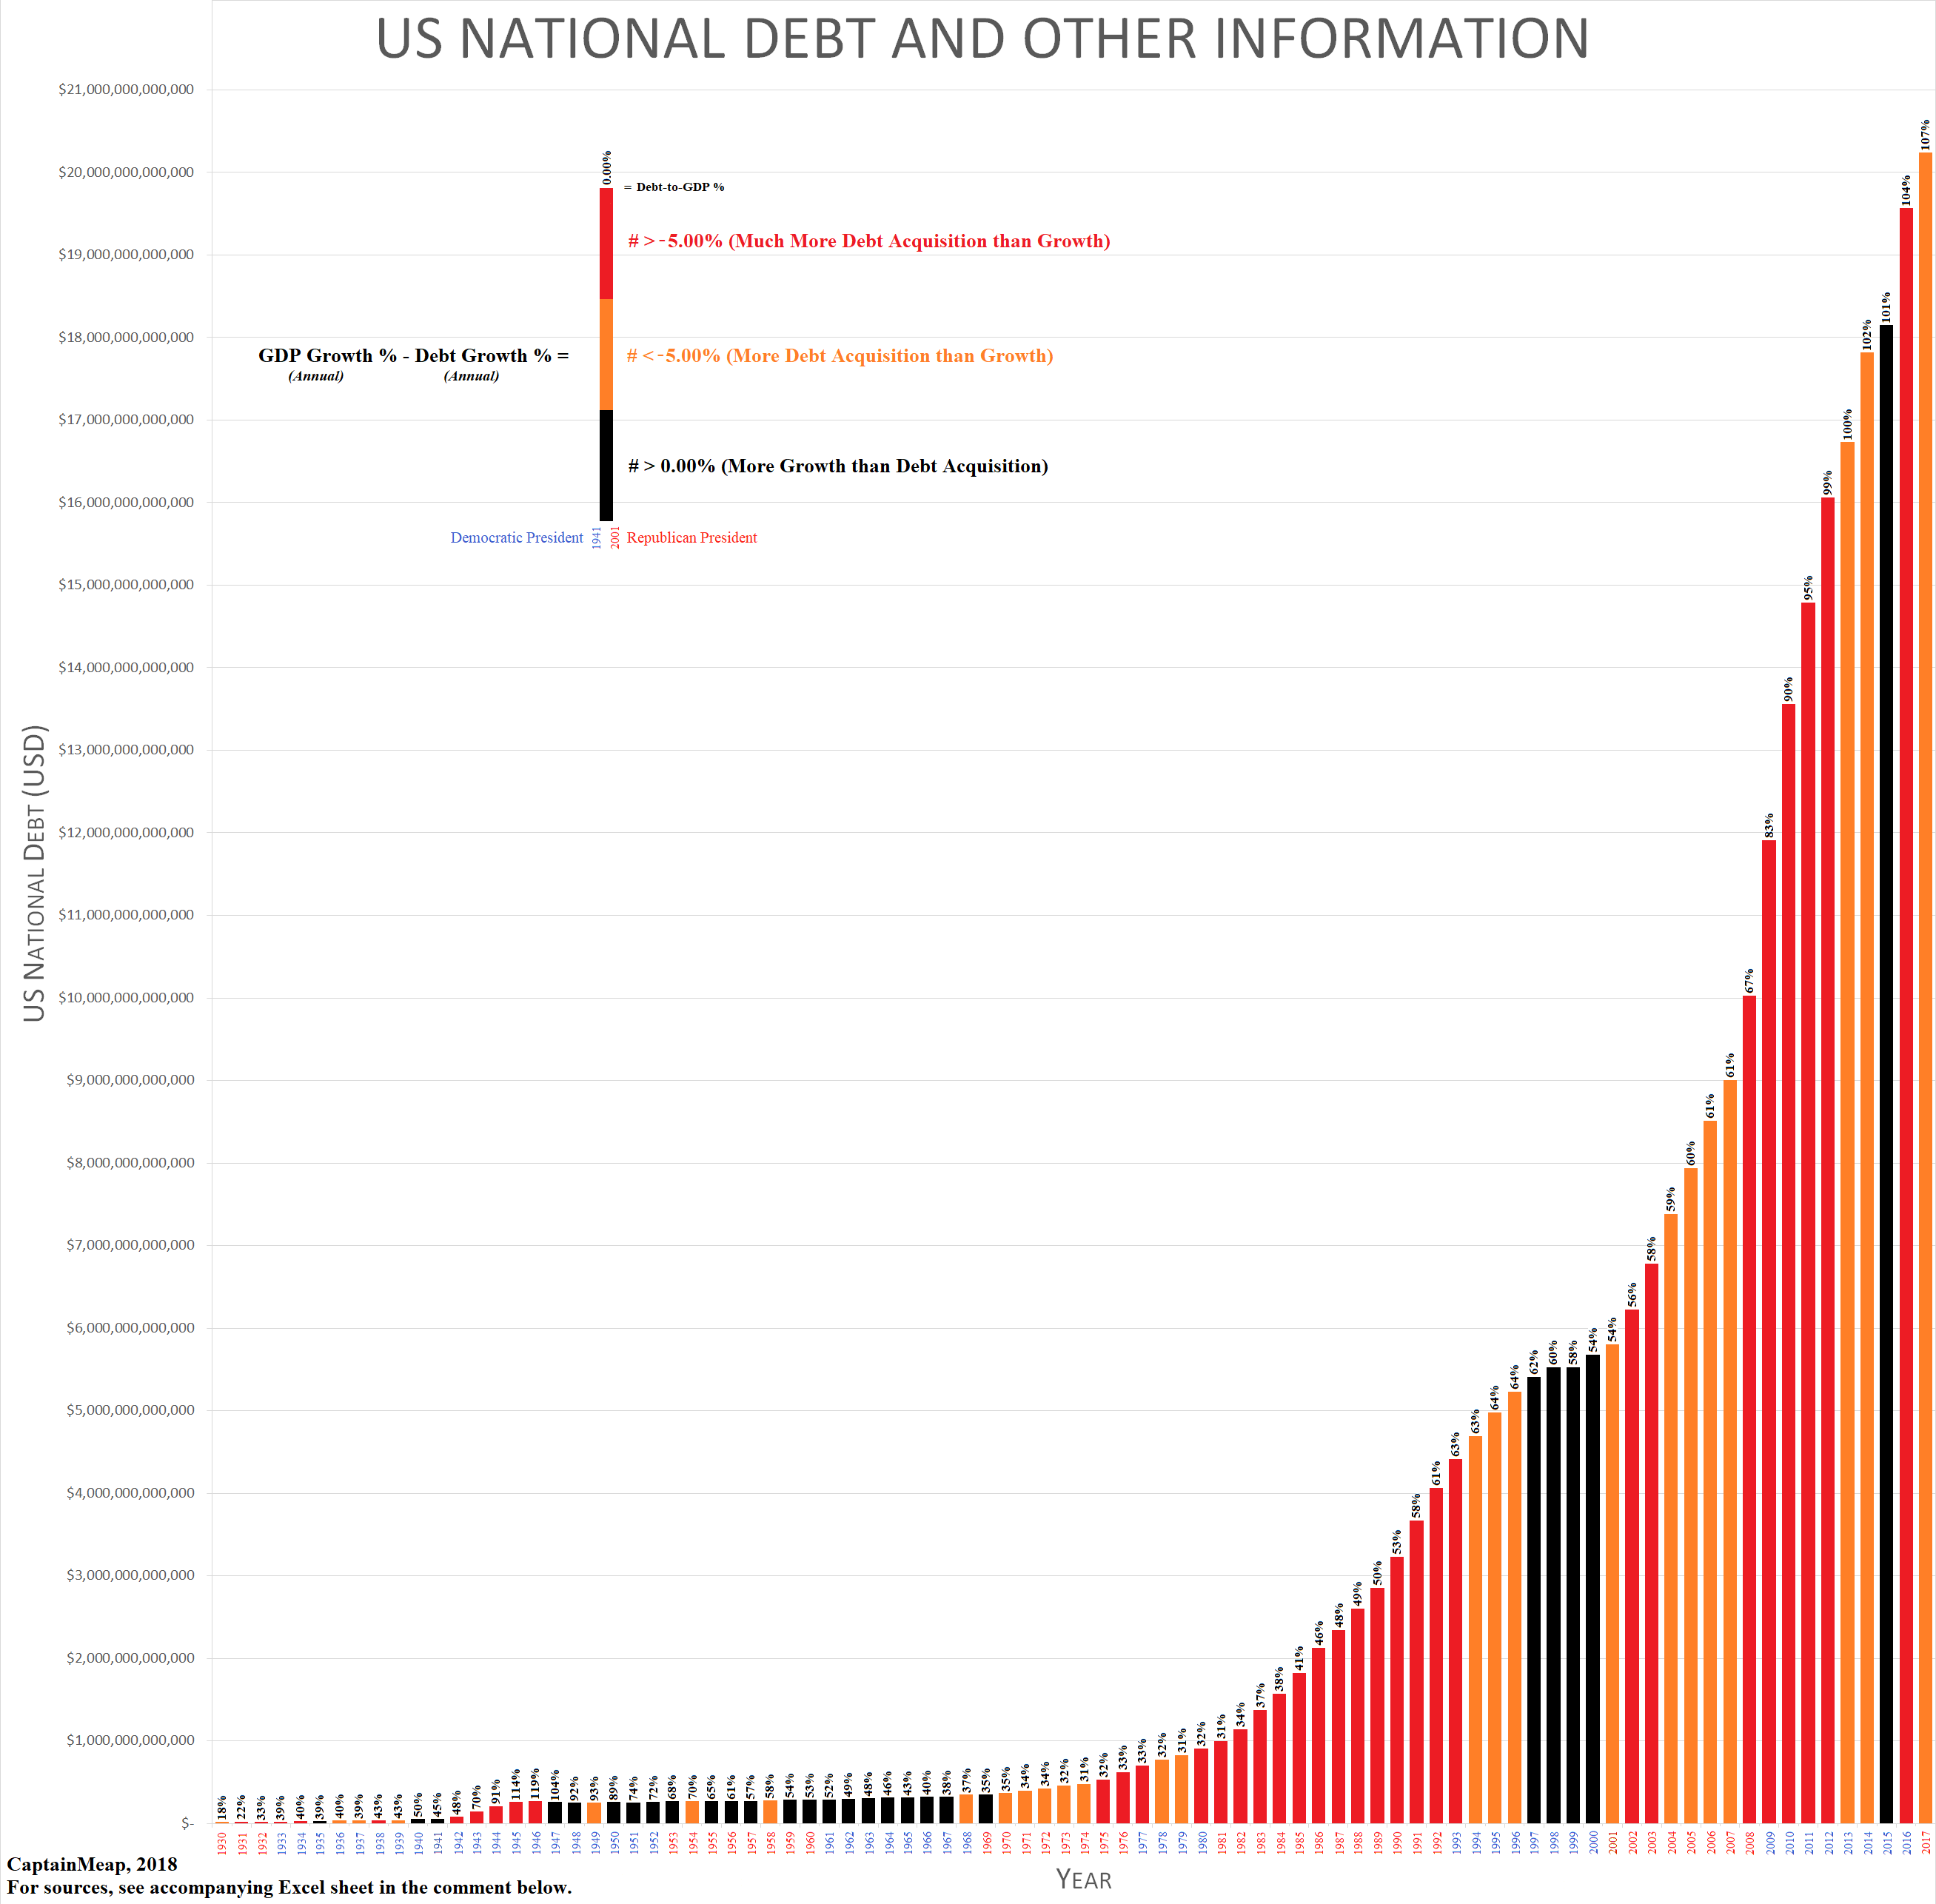 US National Debt (And Related Information) [OC]